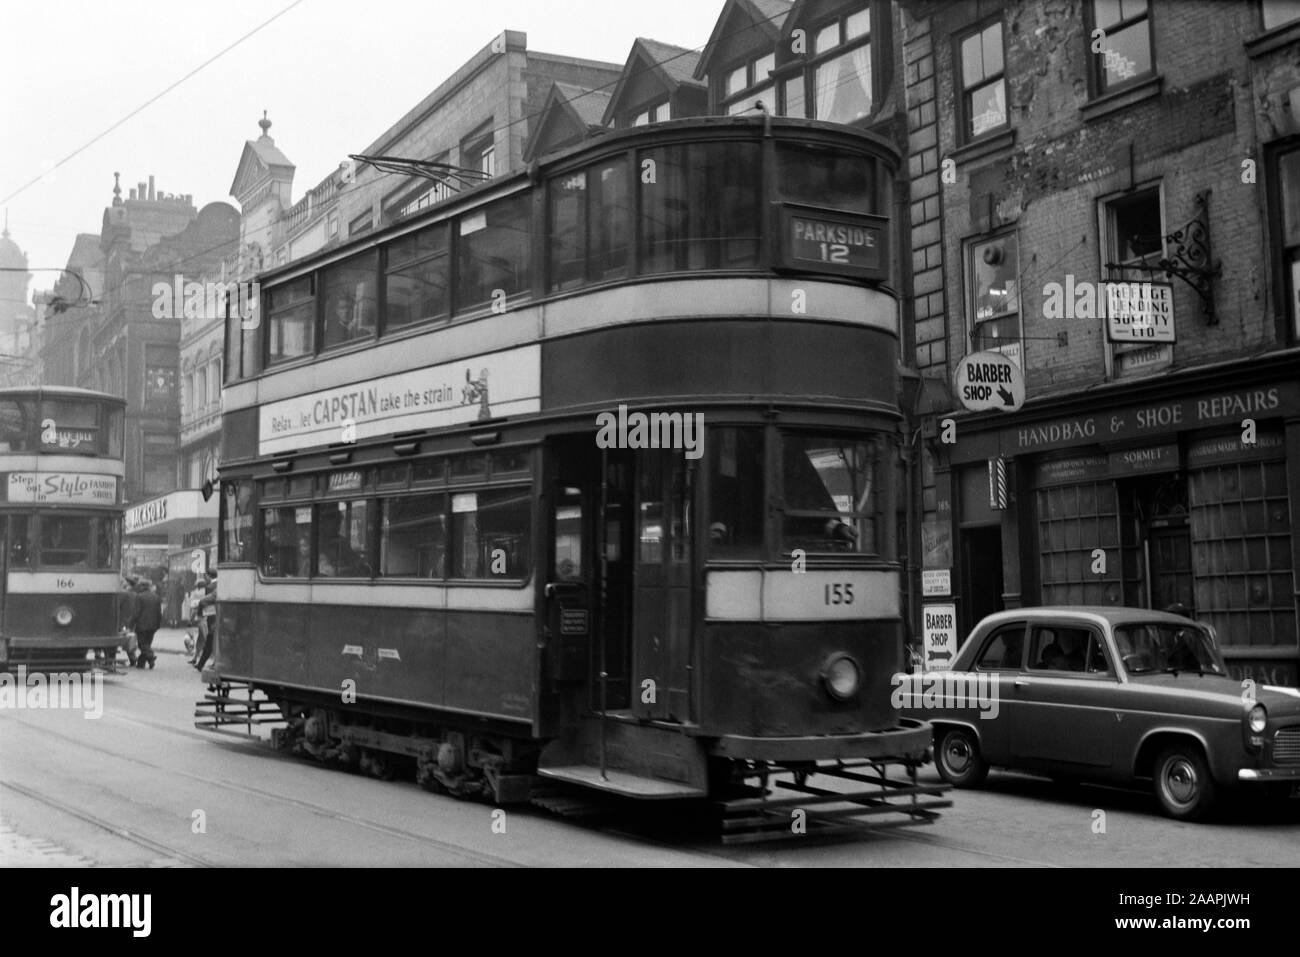 Leeds Tram no 155 and no 166 in the background. Circa 1959 Stock Photo